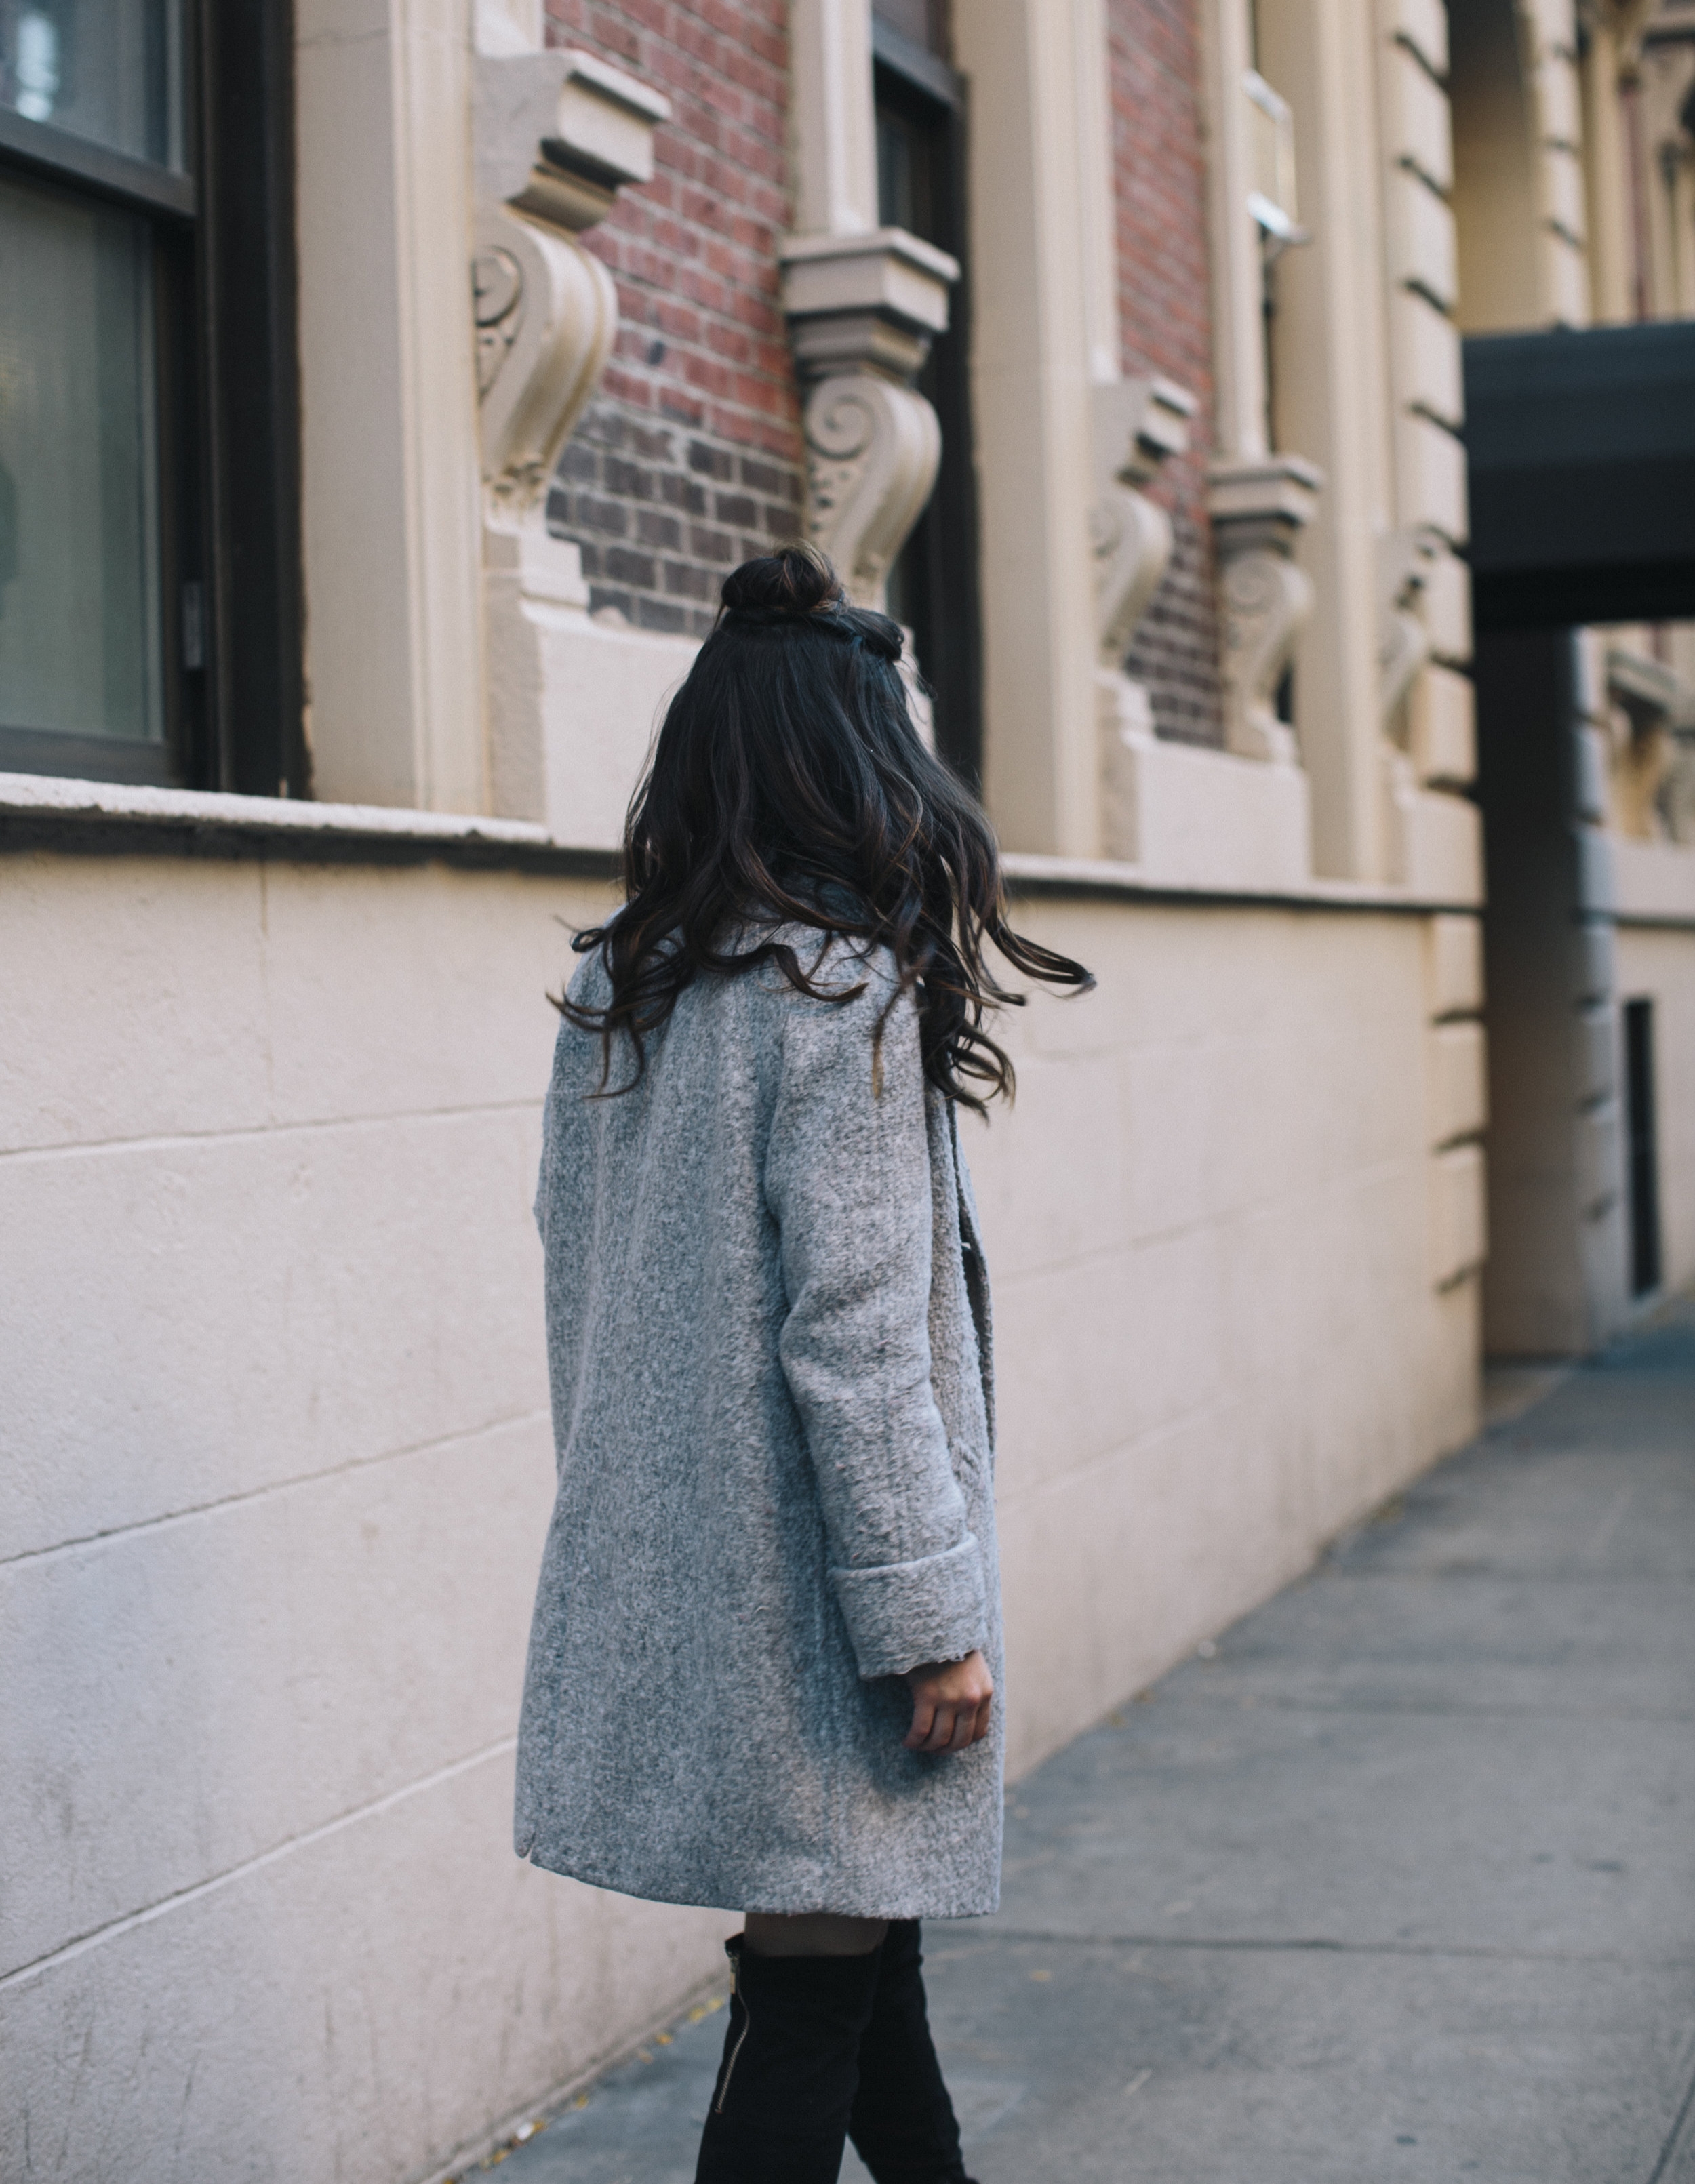 All Grey Look OTK Boots Why I Hate Fashion Week Esther Santer Fashion Blog Louboutins & Love NYC Street Style Blogger Outfit OOTD Trendy Sweatshirt Dress Topknot Coat Women Girl Shoes Shopping Zara Monochome Beauty Look Accessories Winter Wear Clothes.jpg